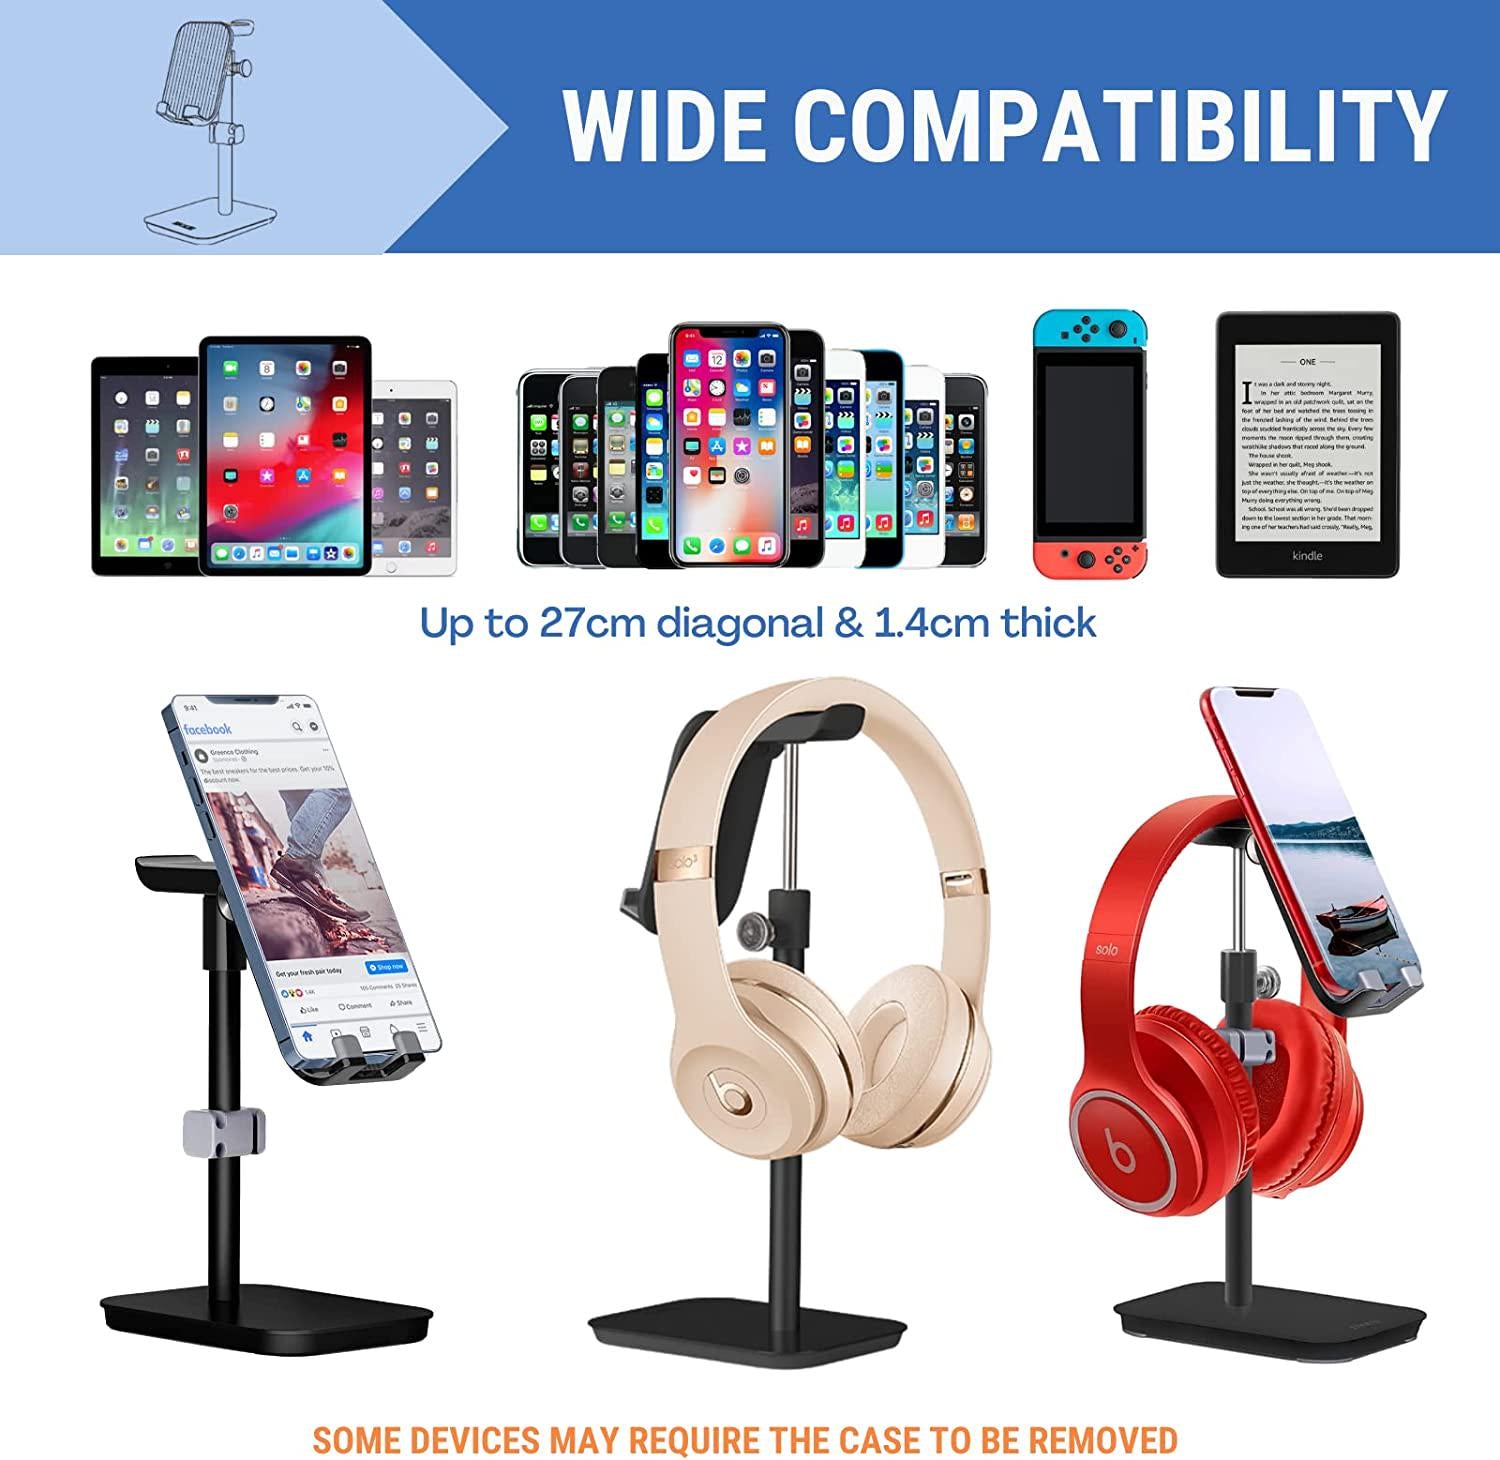 Esolei, ESOLEI Ergonomic Phone Stand Headphone Stand - Relieves Eye Neck Strain | Rotates 360° | Adjustable Angle 23-55° and Height to 26cm | Sturdy iPad Stand with Weighted Metal Base (Black)